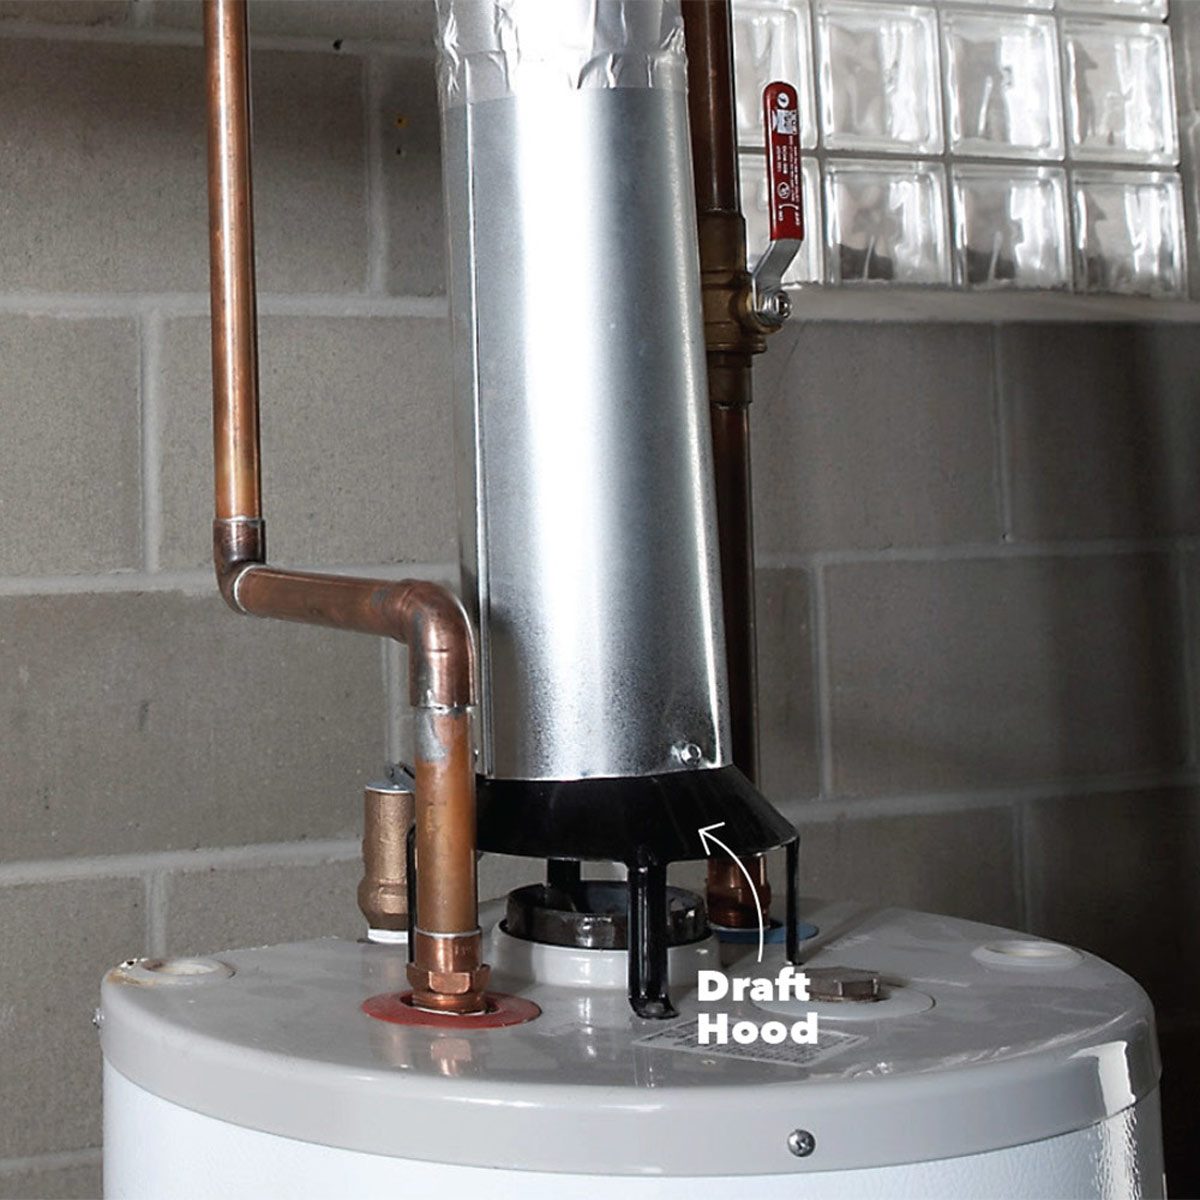 Dr. Seuss water heater venting - The right way: